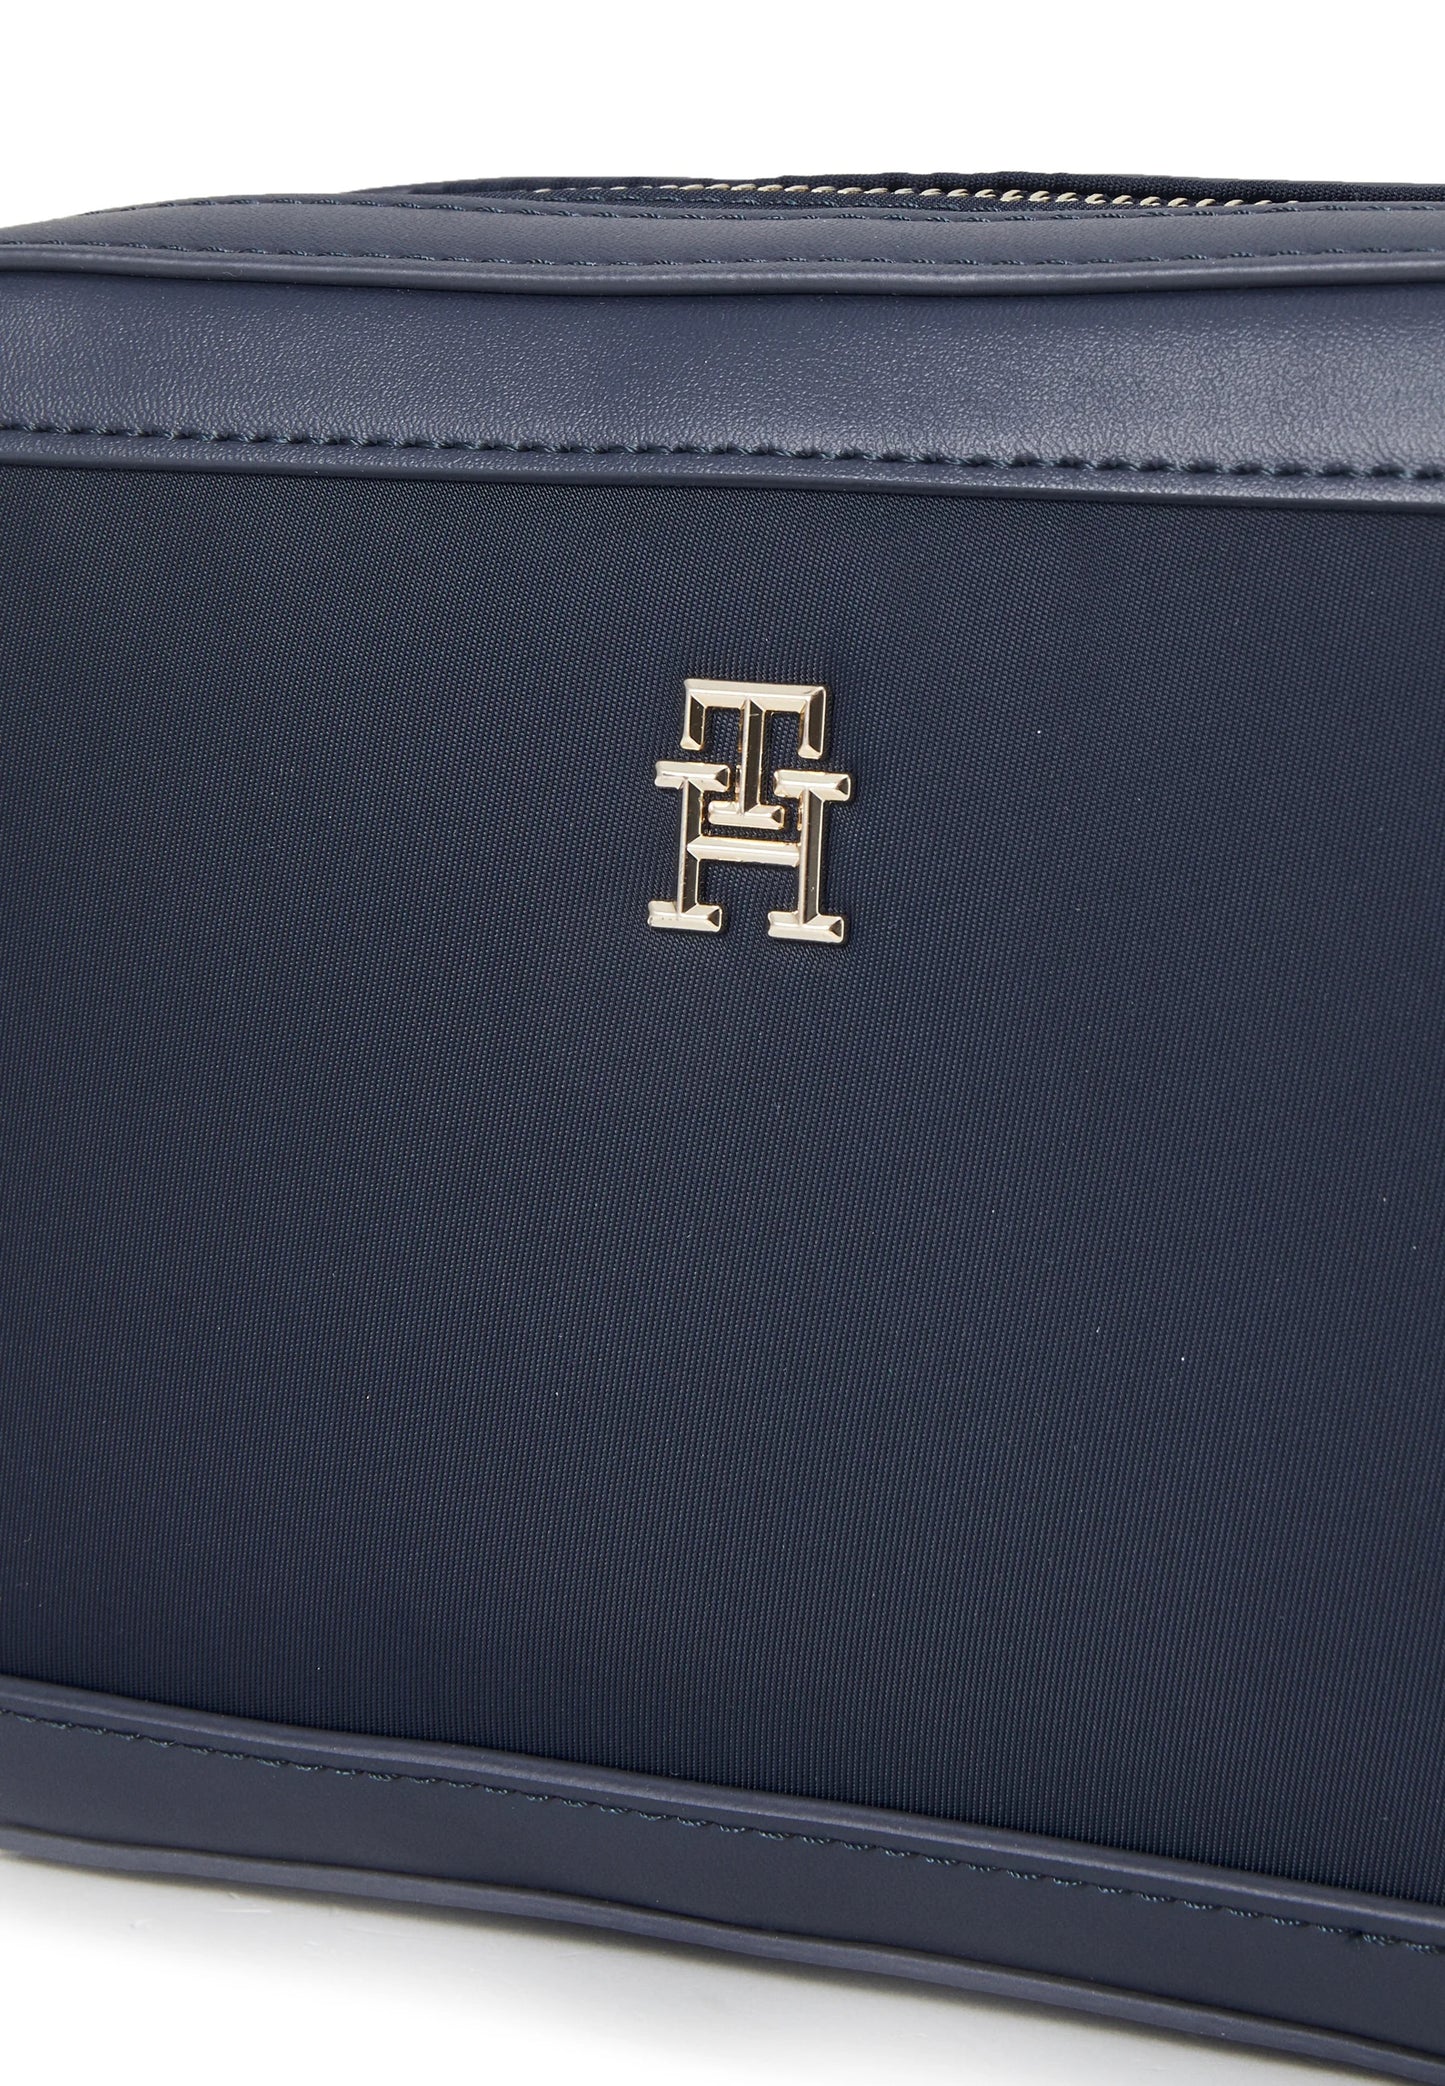 Navy essential flap crossover bag